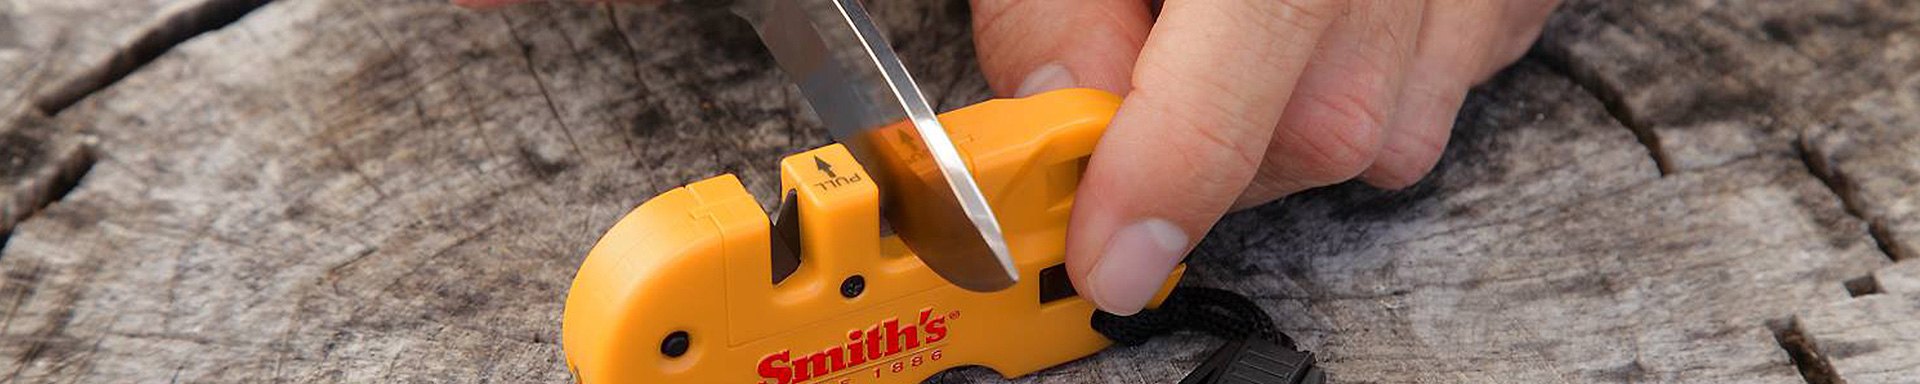 Smith's 50005 Edge Pro Compact Electric Knife Sharpener - Yellow & Grey -  Straight Edge 2 Stage Sharpener - Electric & Manual Sharpening - Blade  Guide - Outdoor & Kitchen - Pocket & Filet Knives 